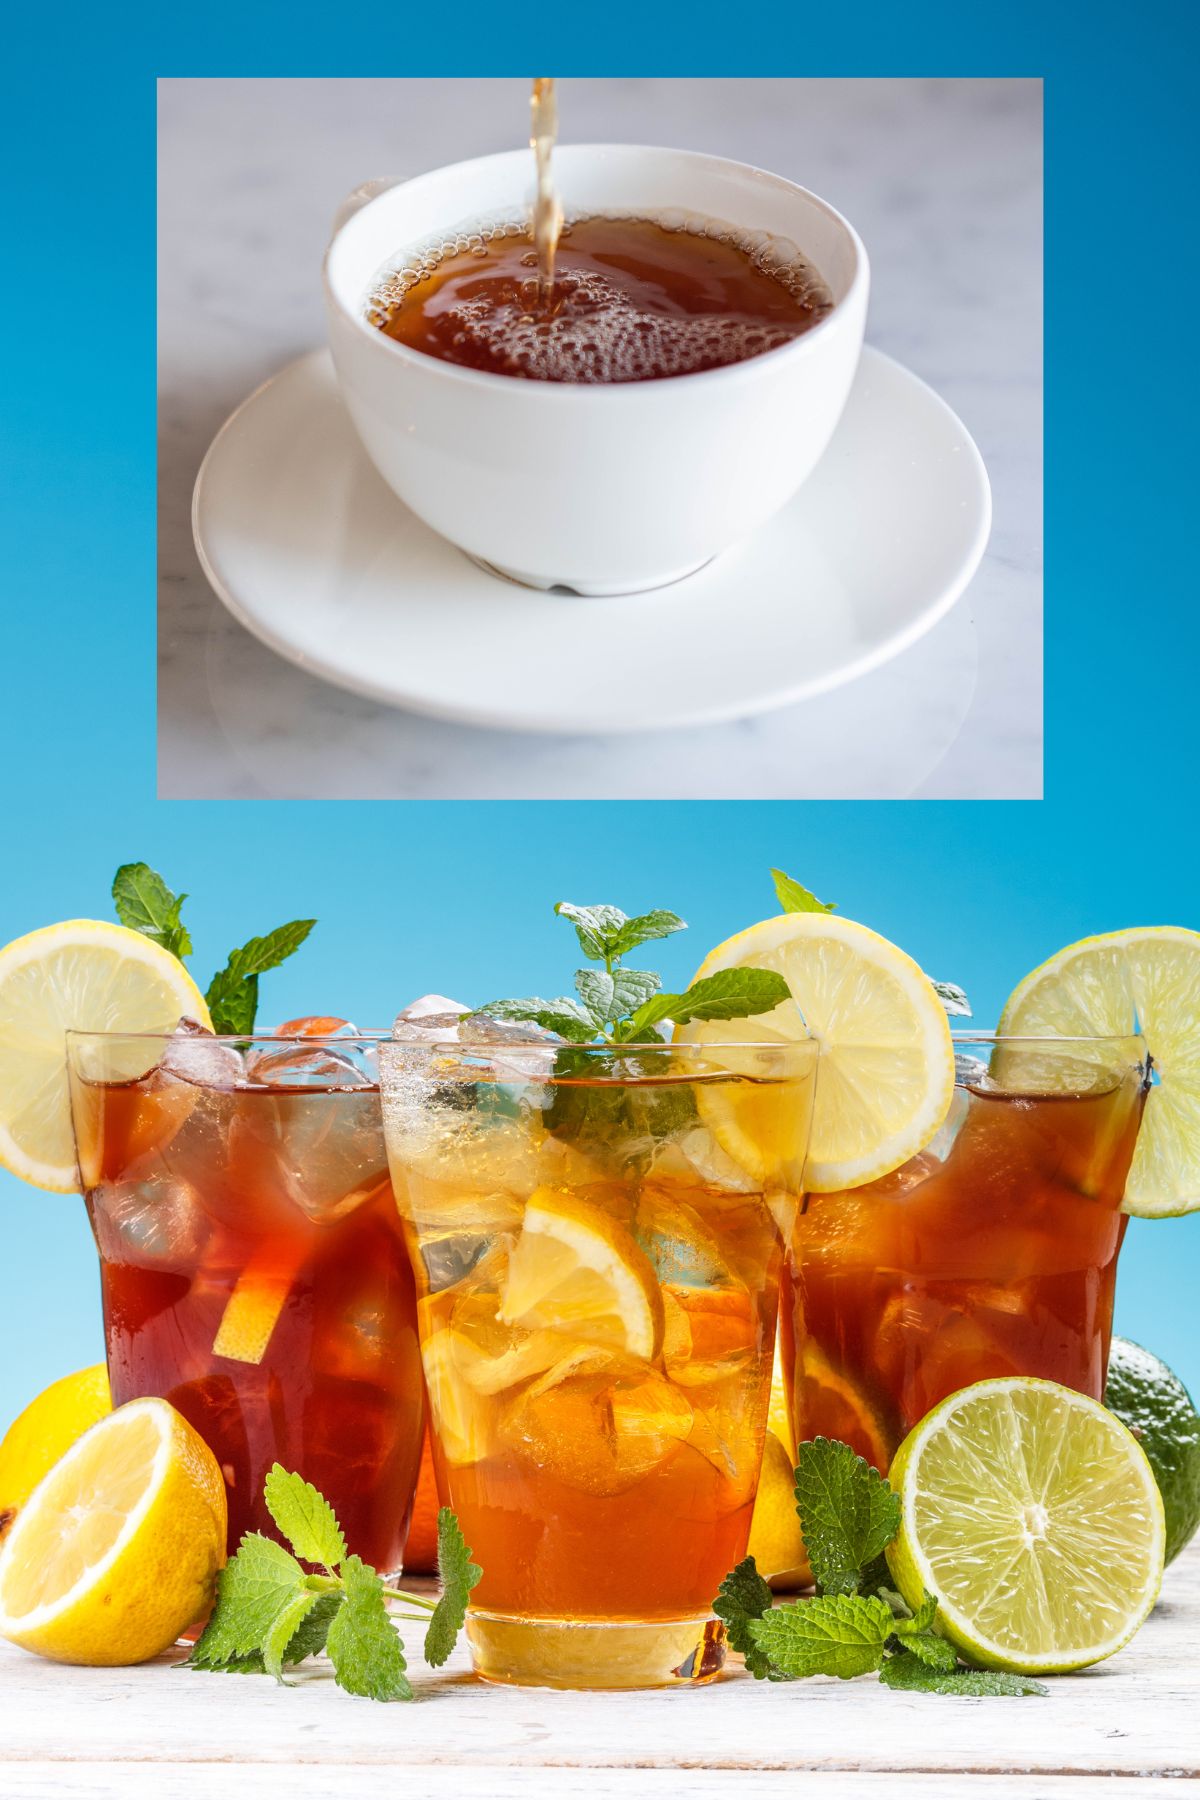 Glasses of Iced Tea and citrus fruit with a cup of hot tea also. 